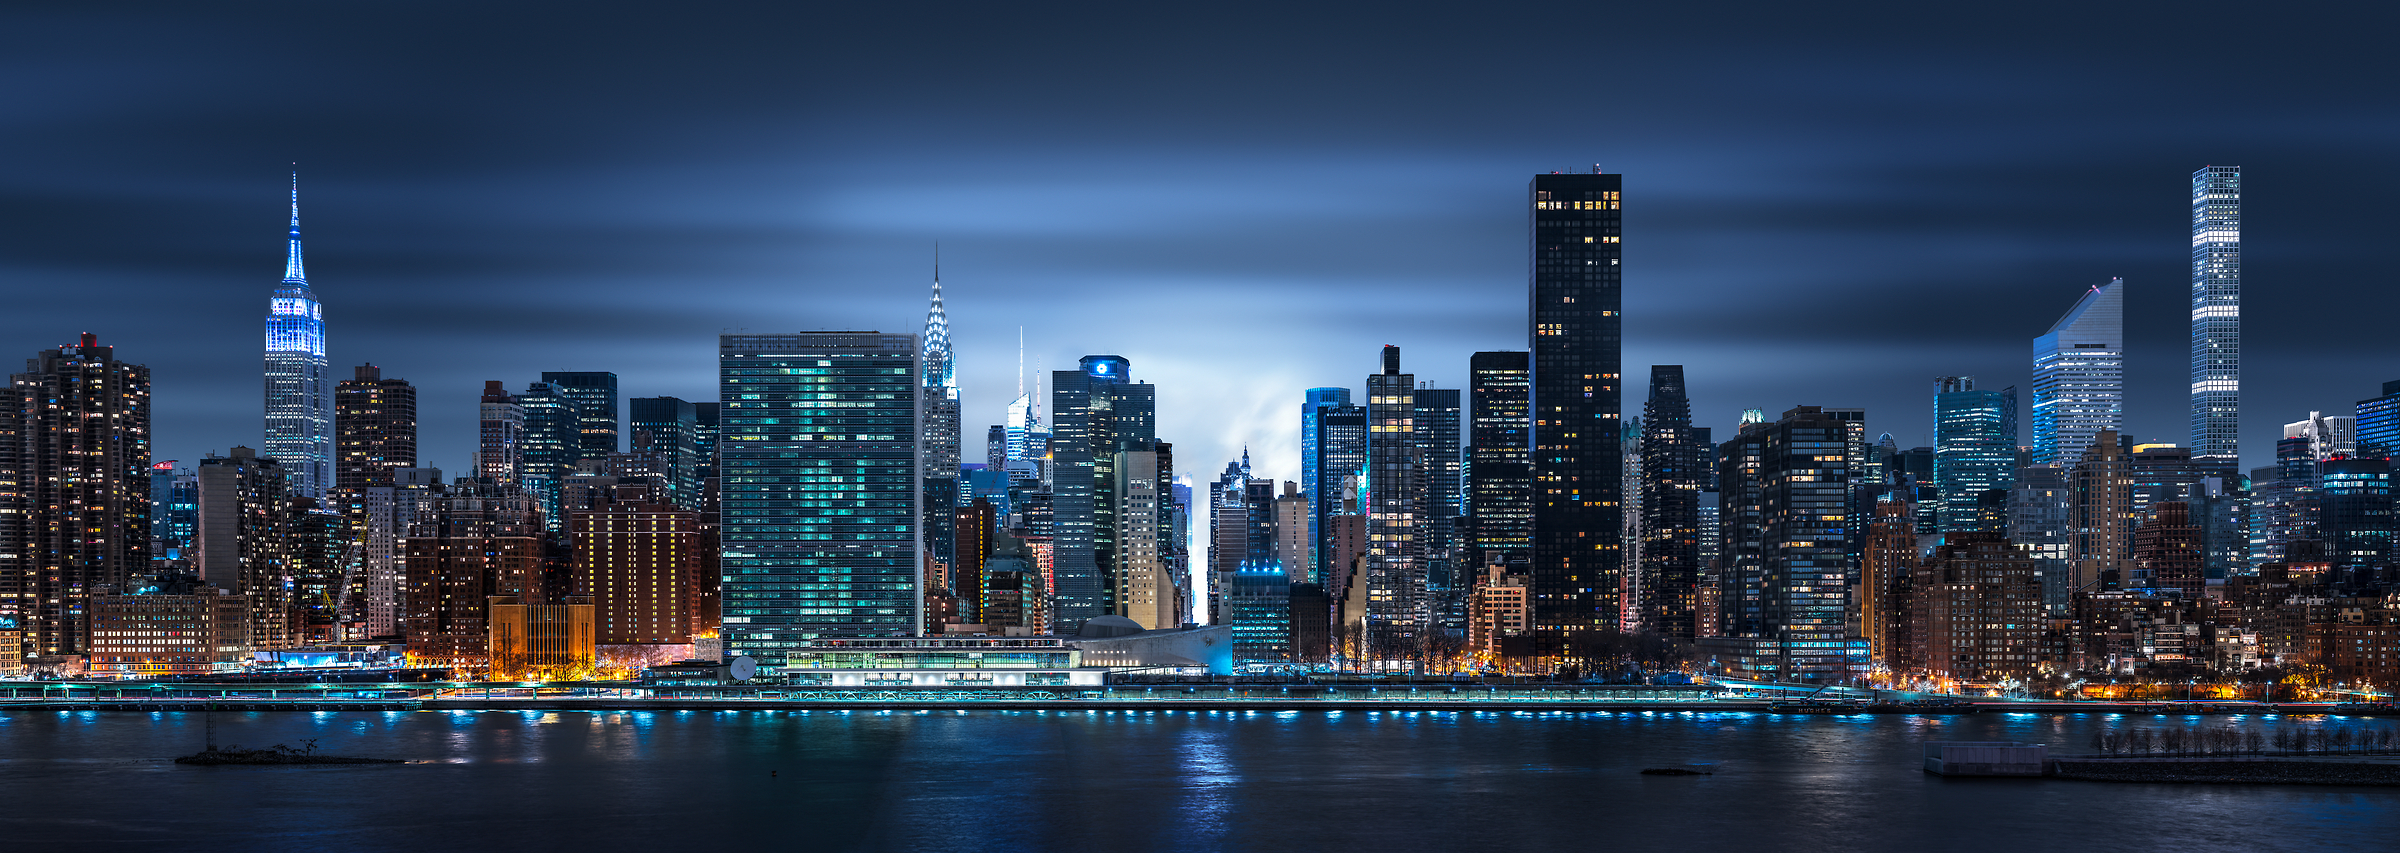 4,122 megapixels! A very high resolution, large-format VAST photo print of the NYC skyline at night with the East River; cityscape photo created by Dan Piech.